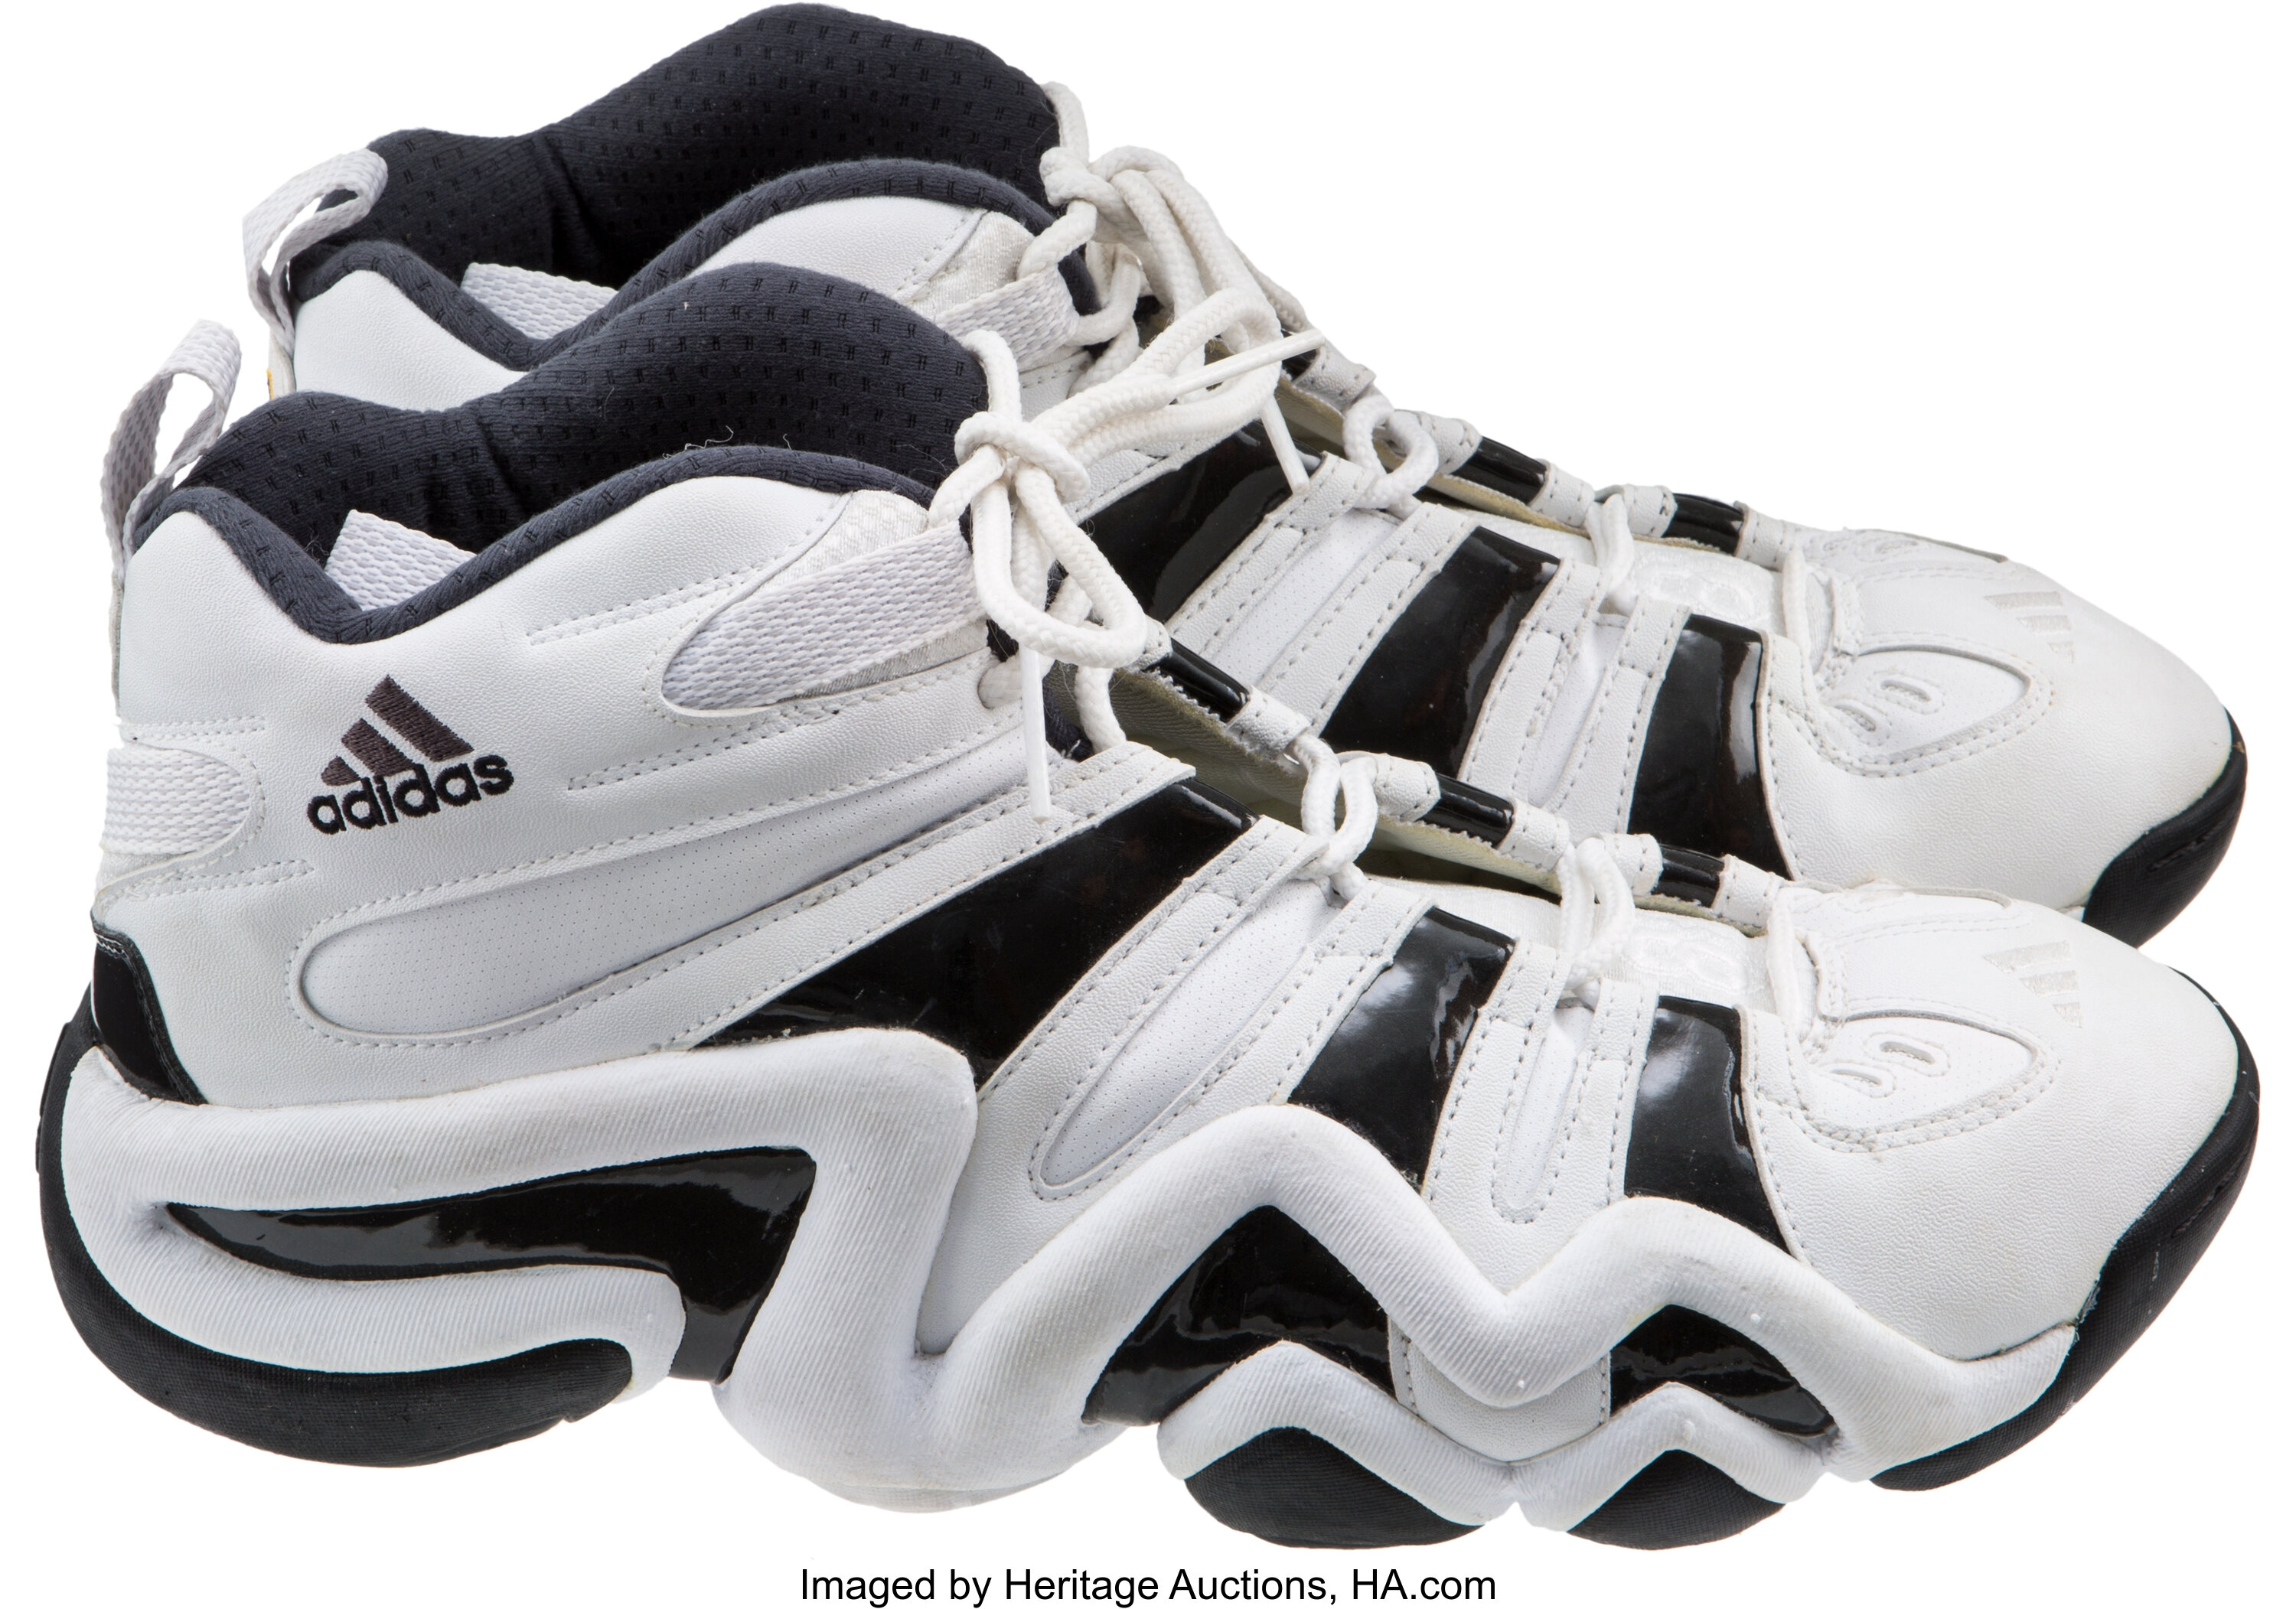 Kobe Bryant's Game Worn adidas Crazy 8 From The 1998 NBA All-Star Game Up  For Auction - Sneaker News